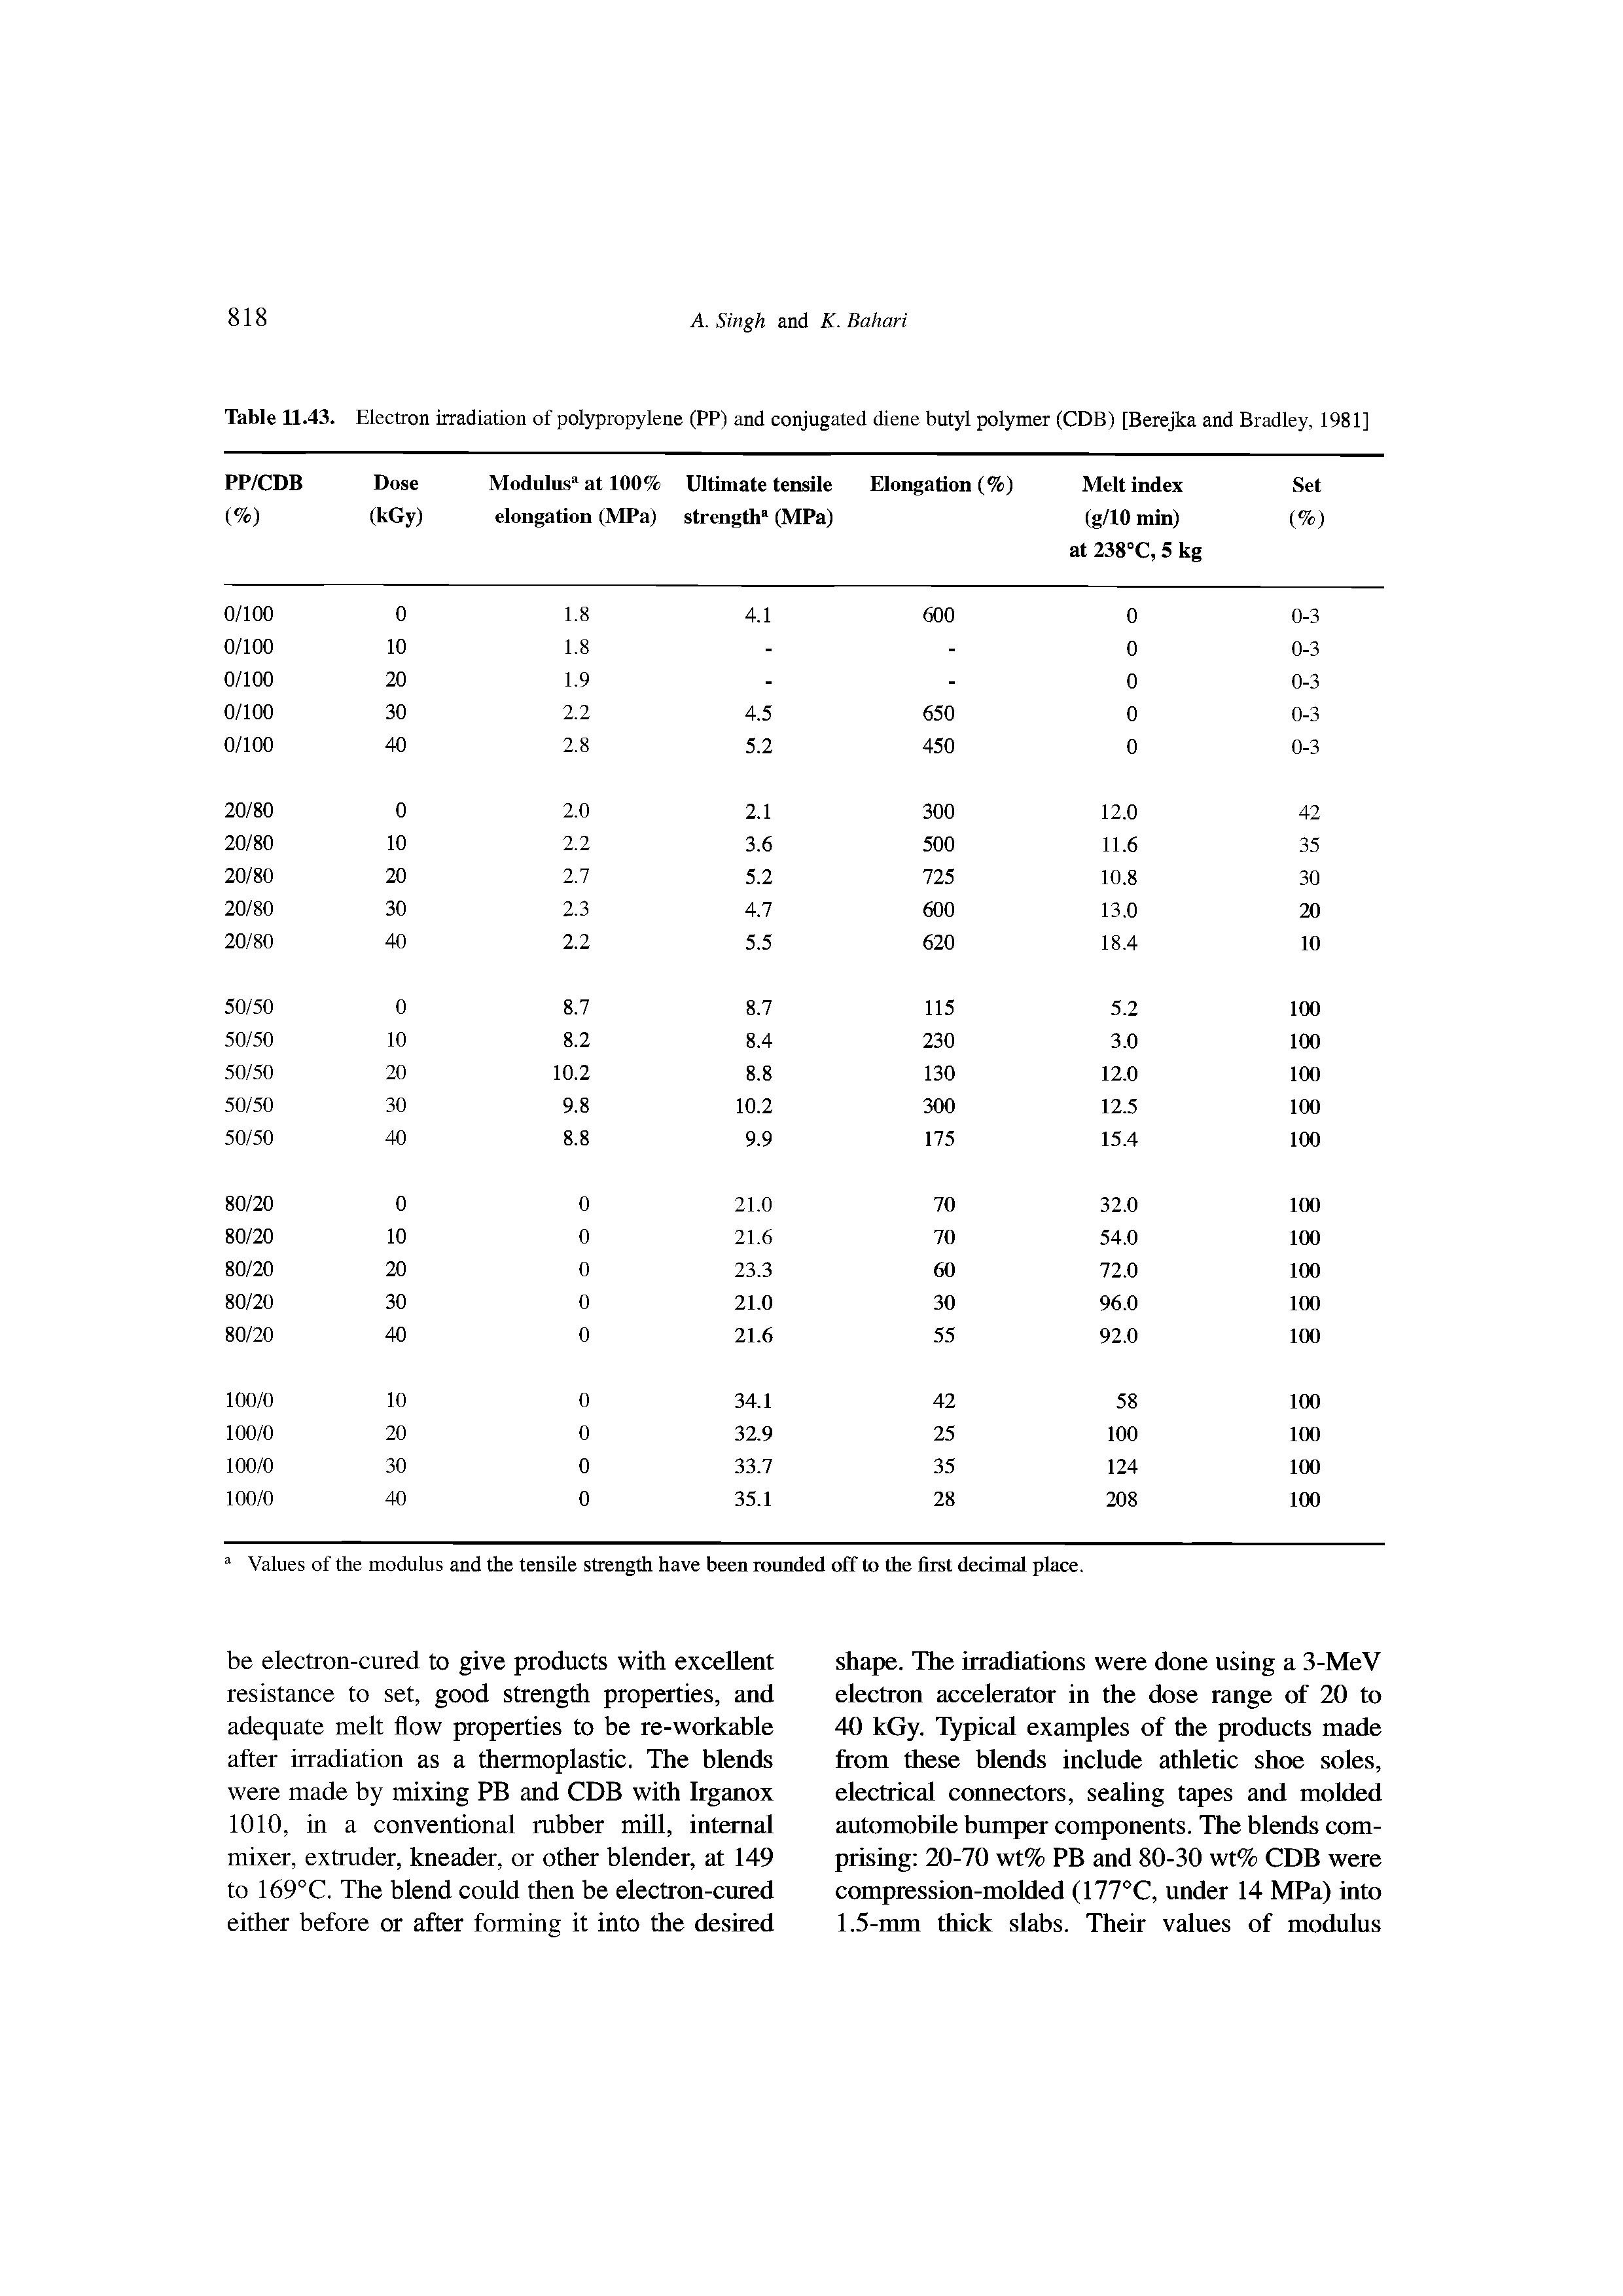 Table 11.43. Electron irradiation of polypropylene (PP) and conjugated diene butyl polymer (CDB) [Berejka and Bradley, 1981]...